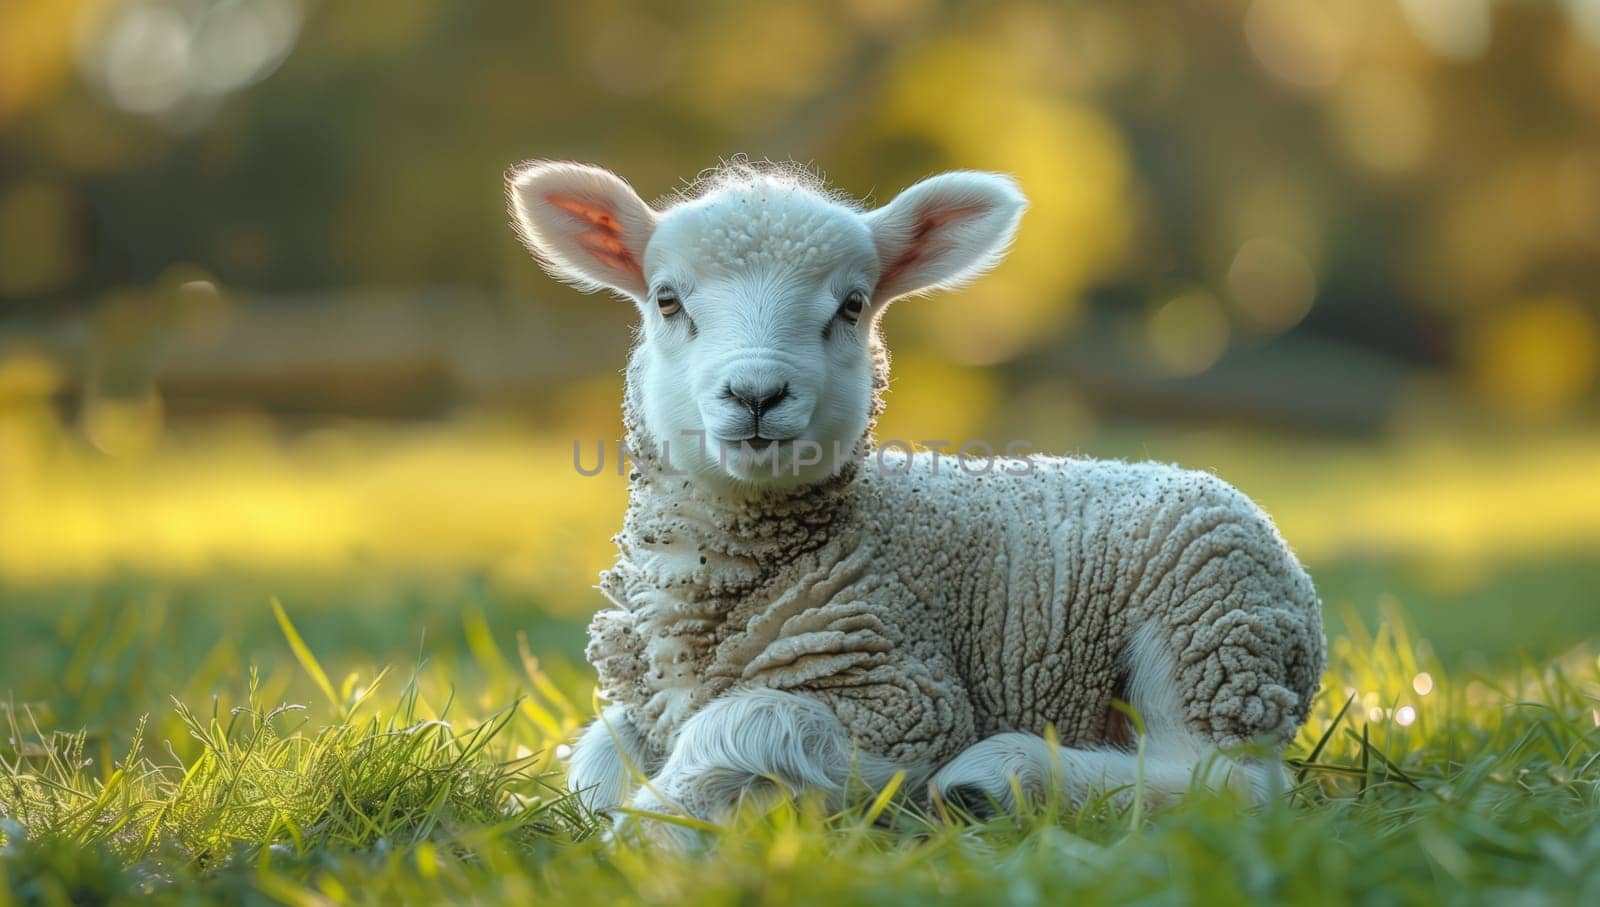 A lamb is resting on grassland, gazing at the camera in a natural landscape by richwolf